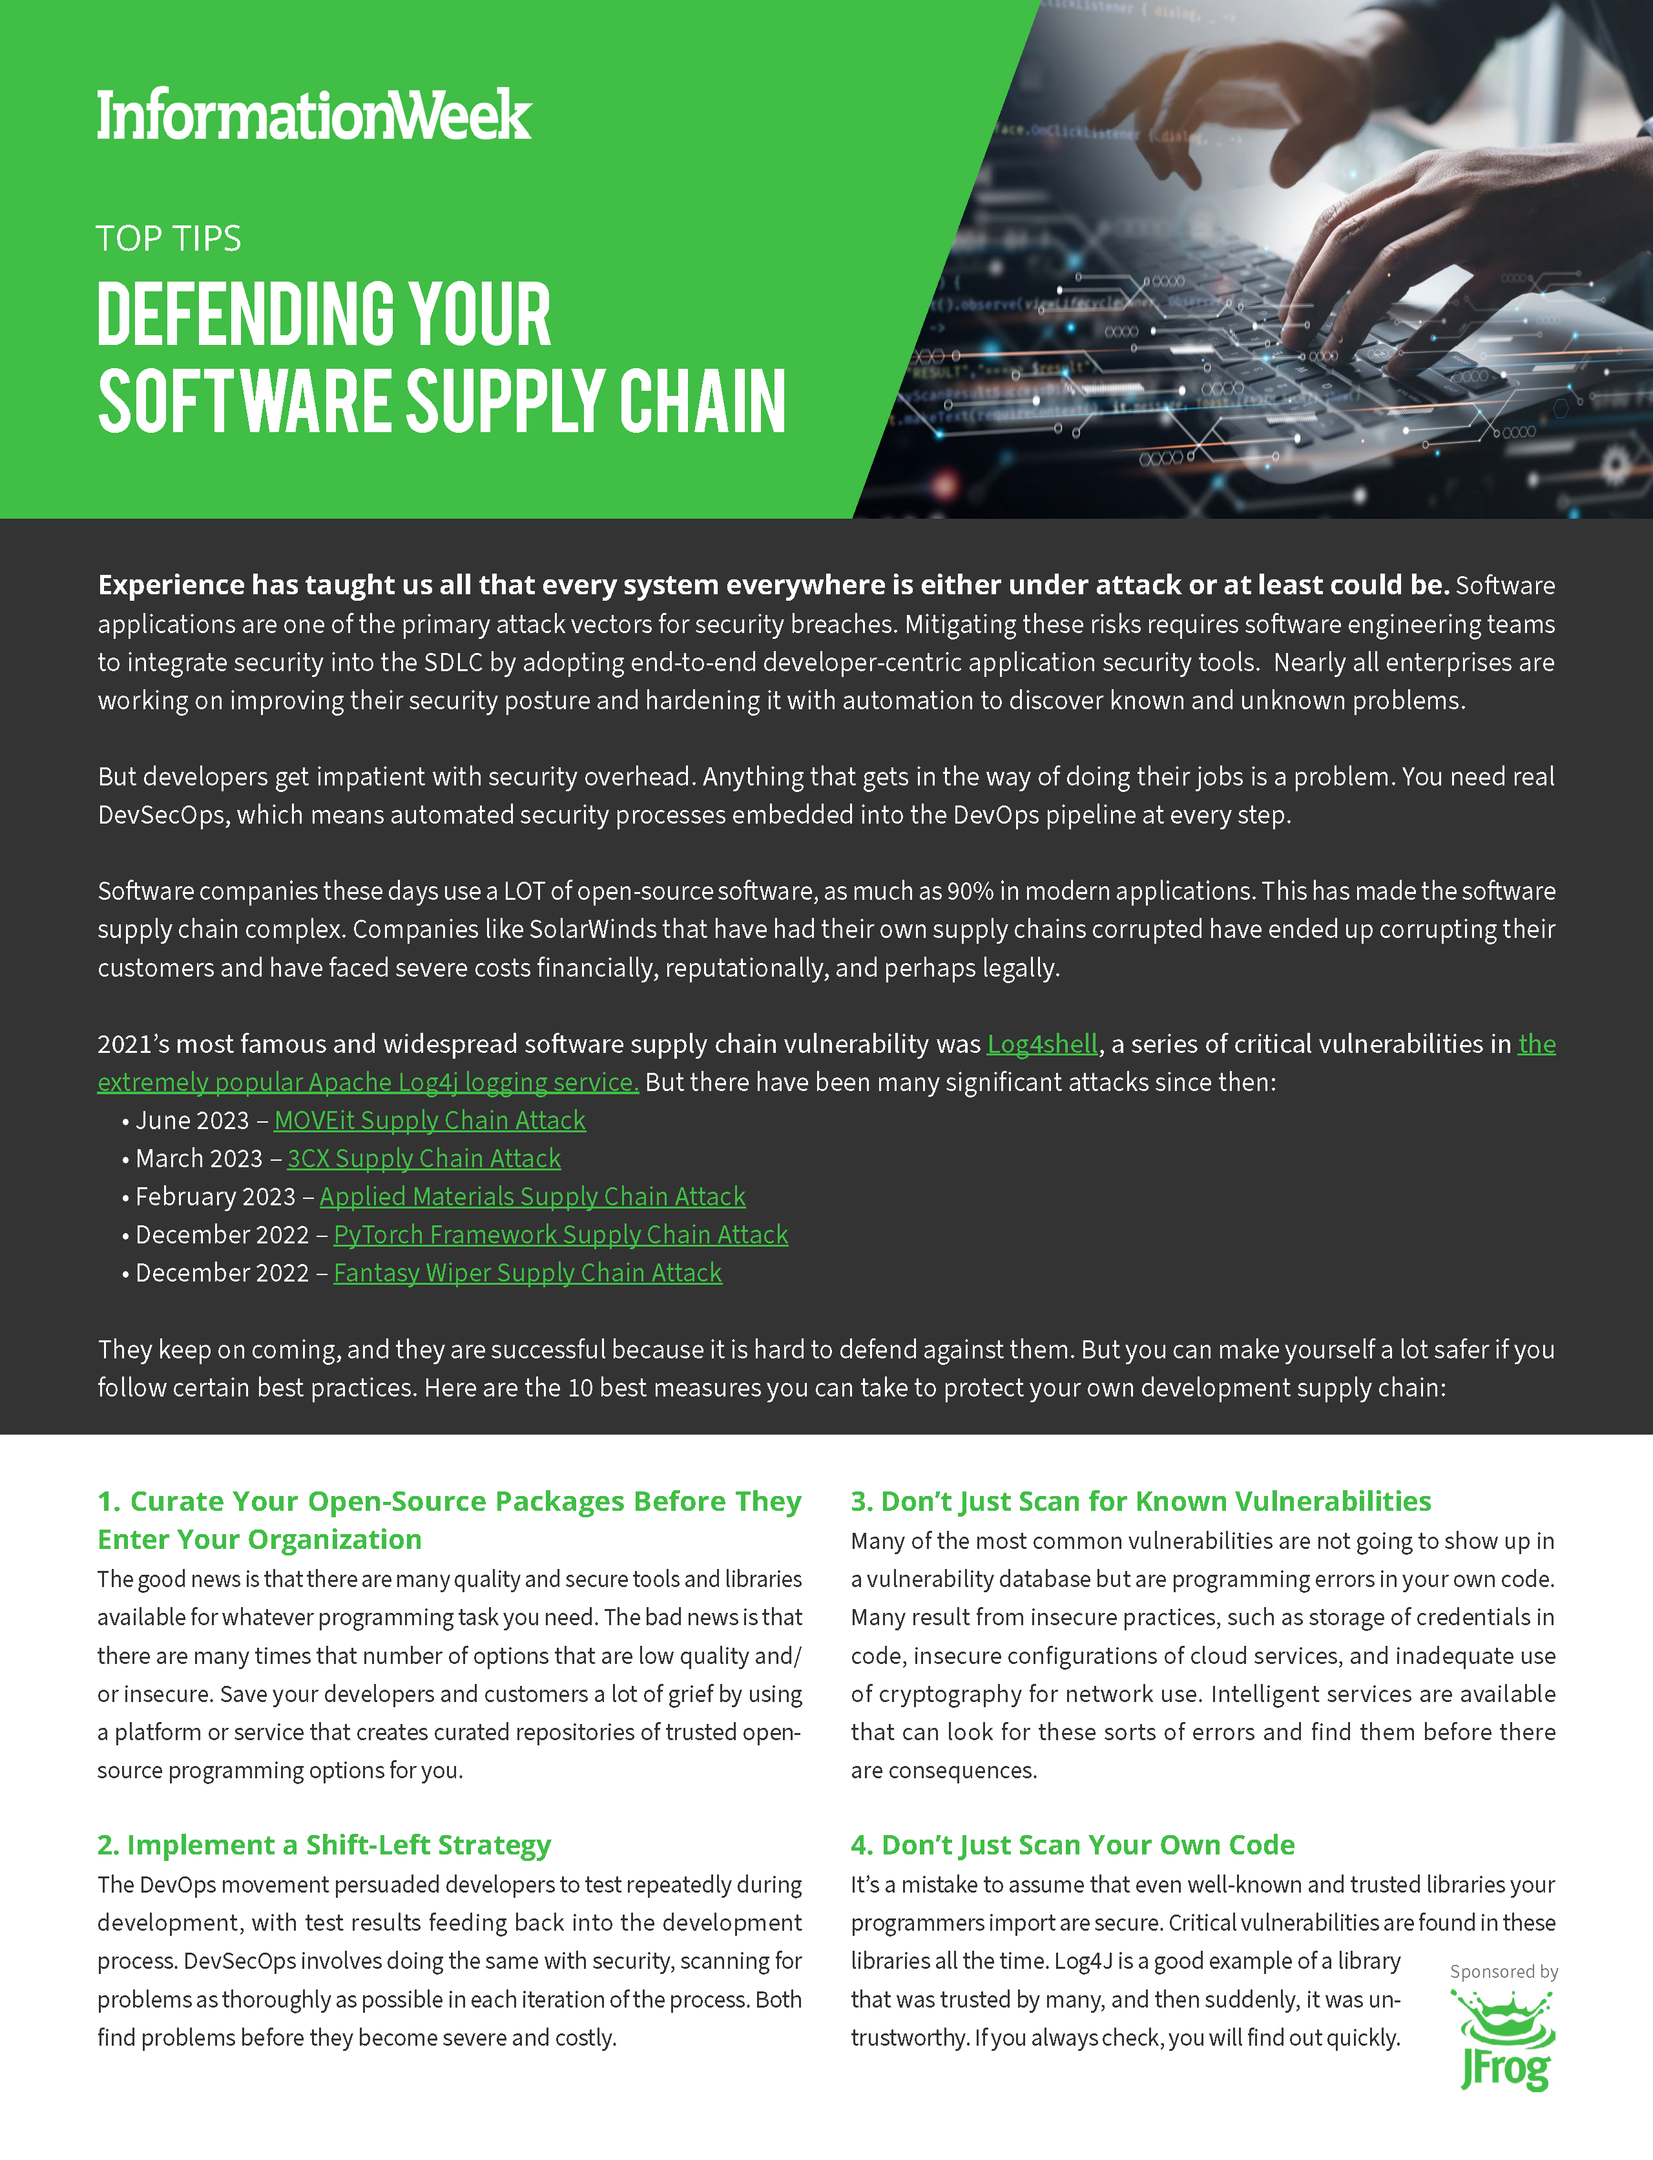 TOP TIPS for Defending Your Software Supply Chain